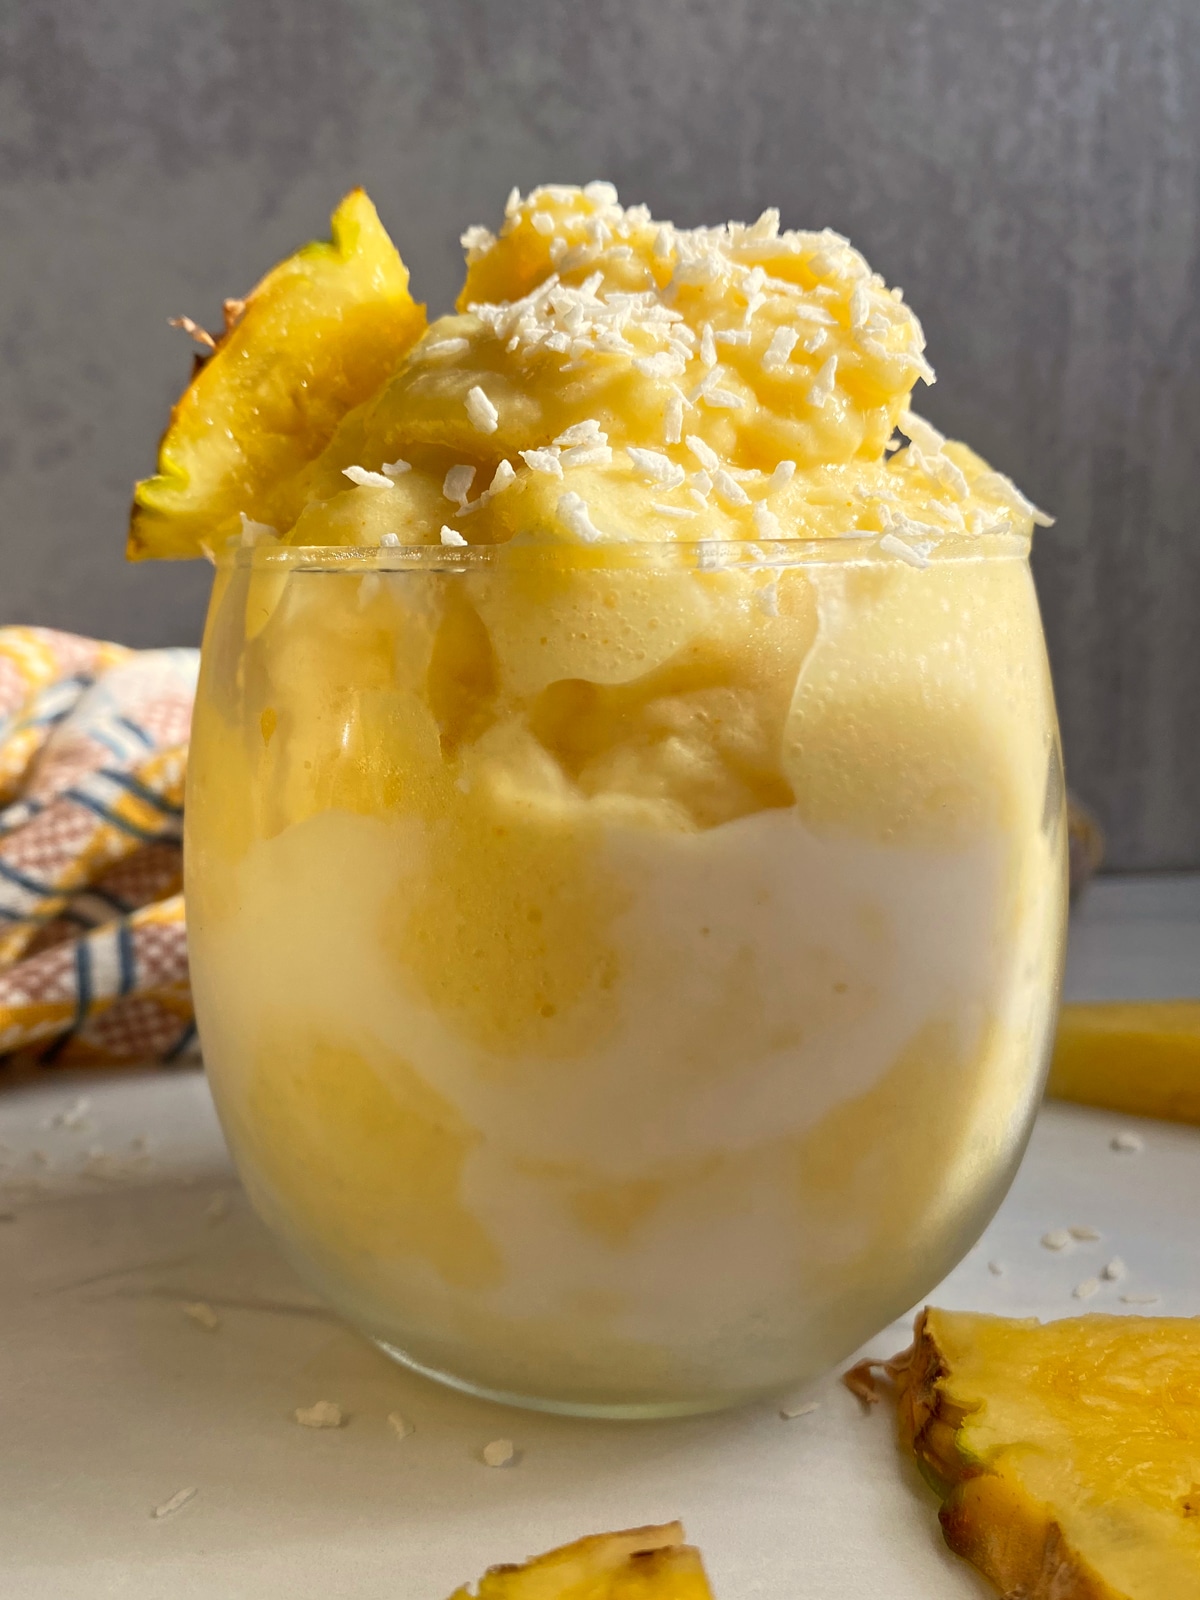 smoothie in a glass cup, topped with shredded coconut and a slice of pineapple